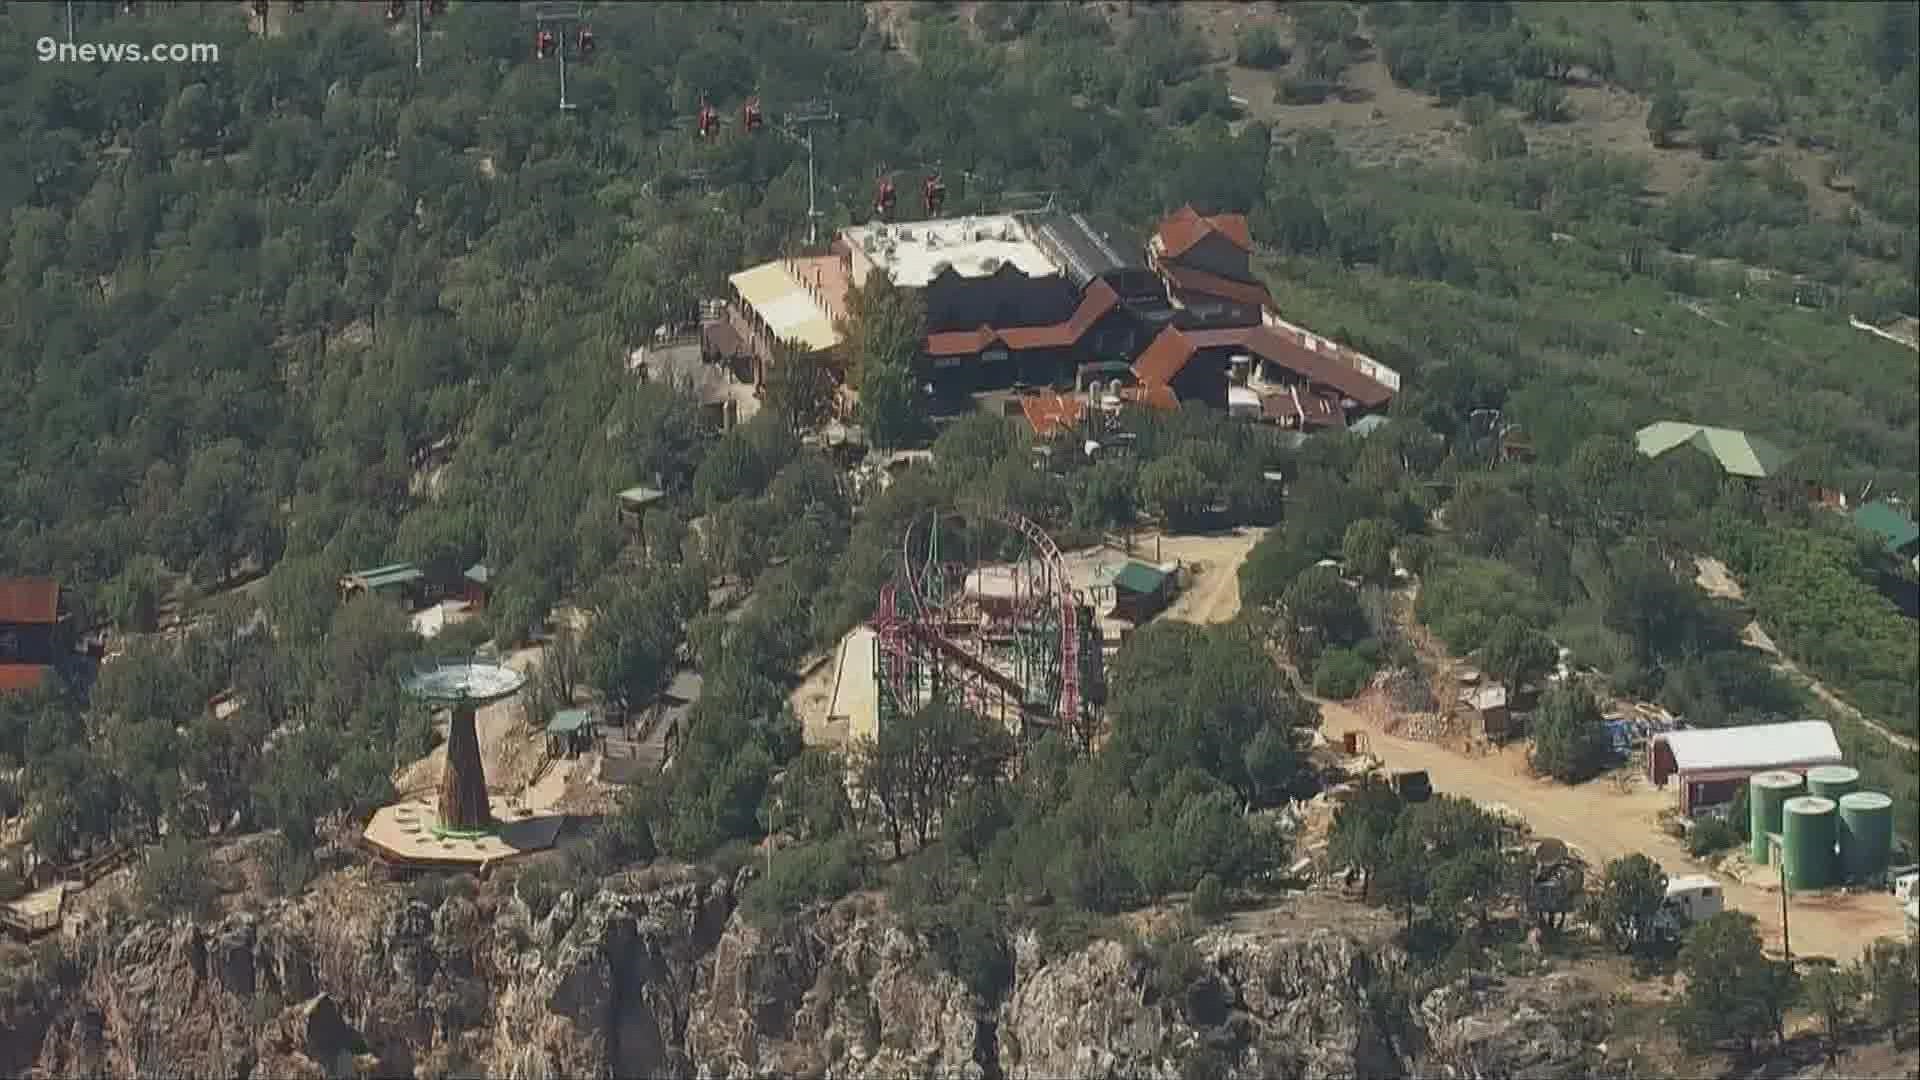 Glenwood Caverns Adventure Park is closed Monday and Tuesday after a child was fatally injured on a ride.